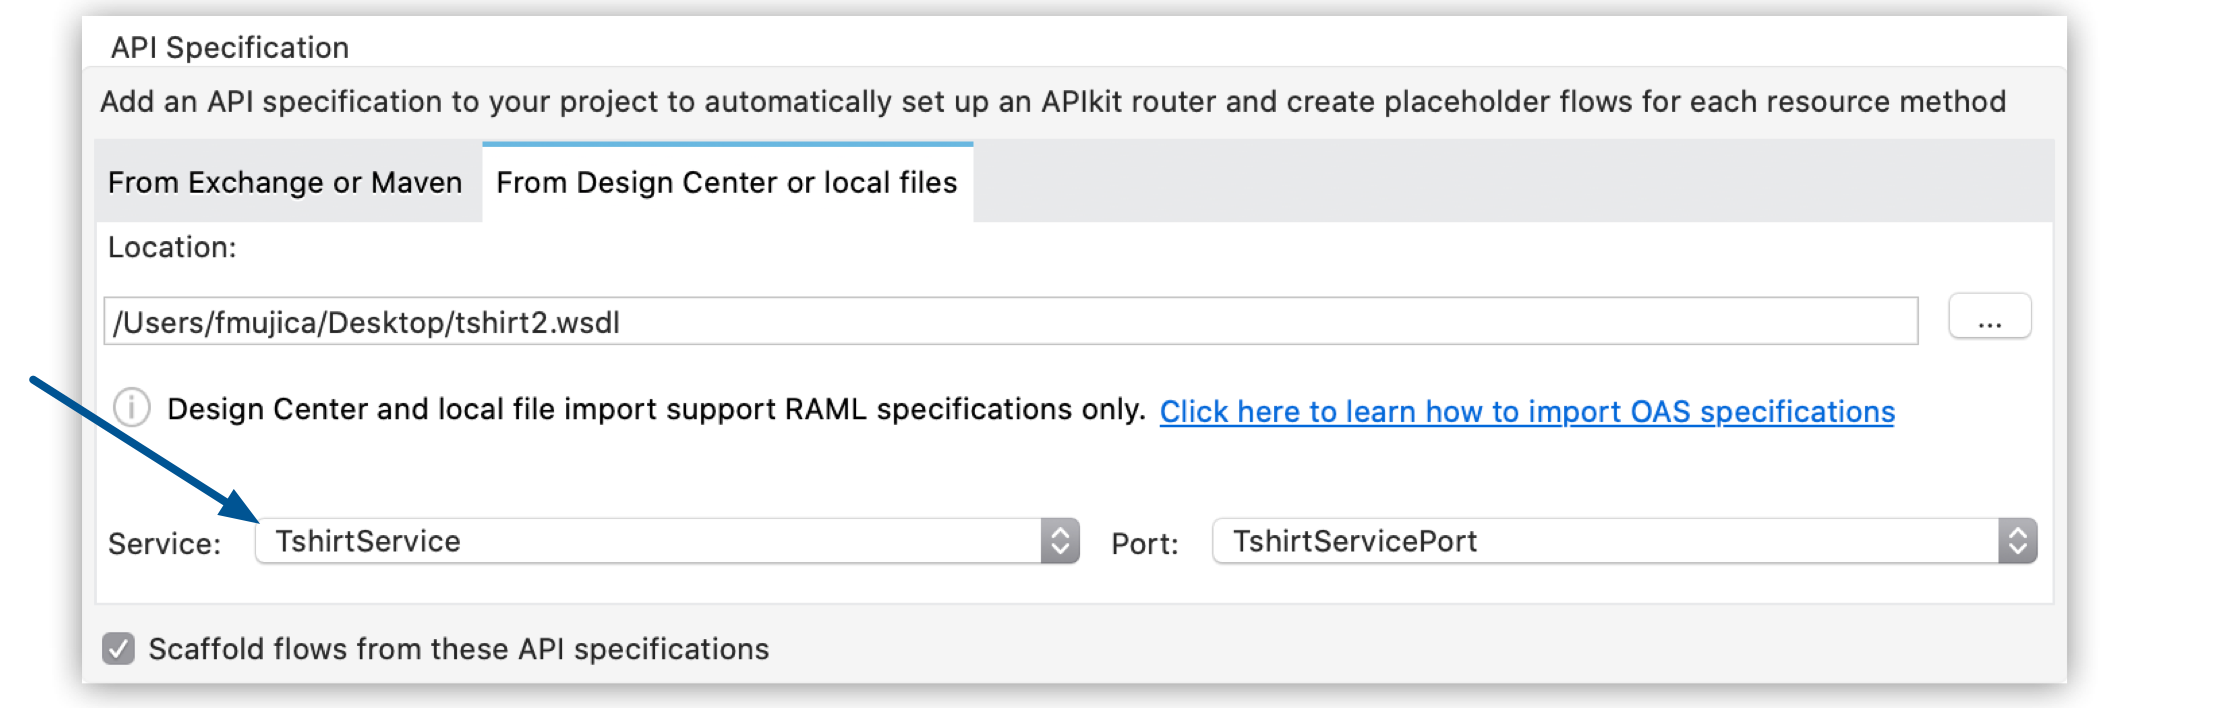 API specification window highlights the service and the port from the drop-down menus.